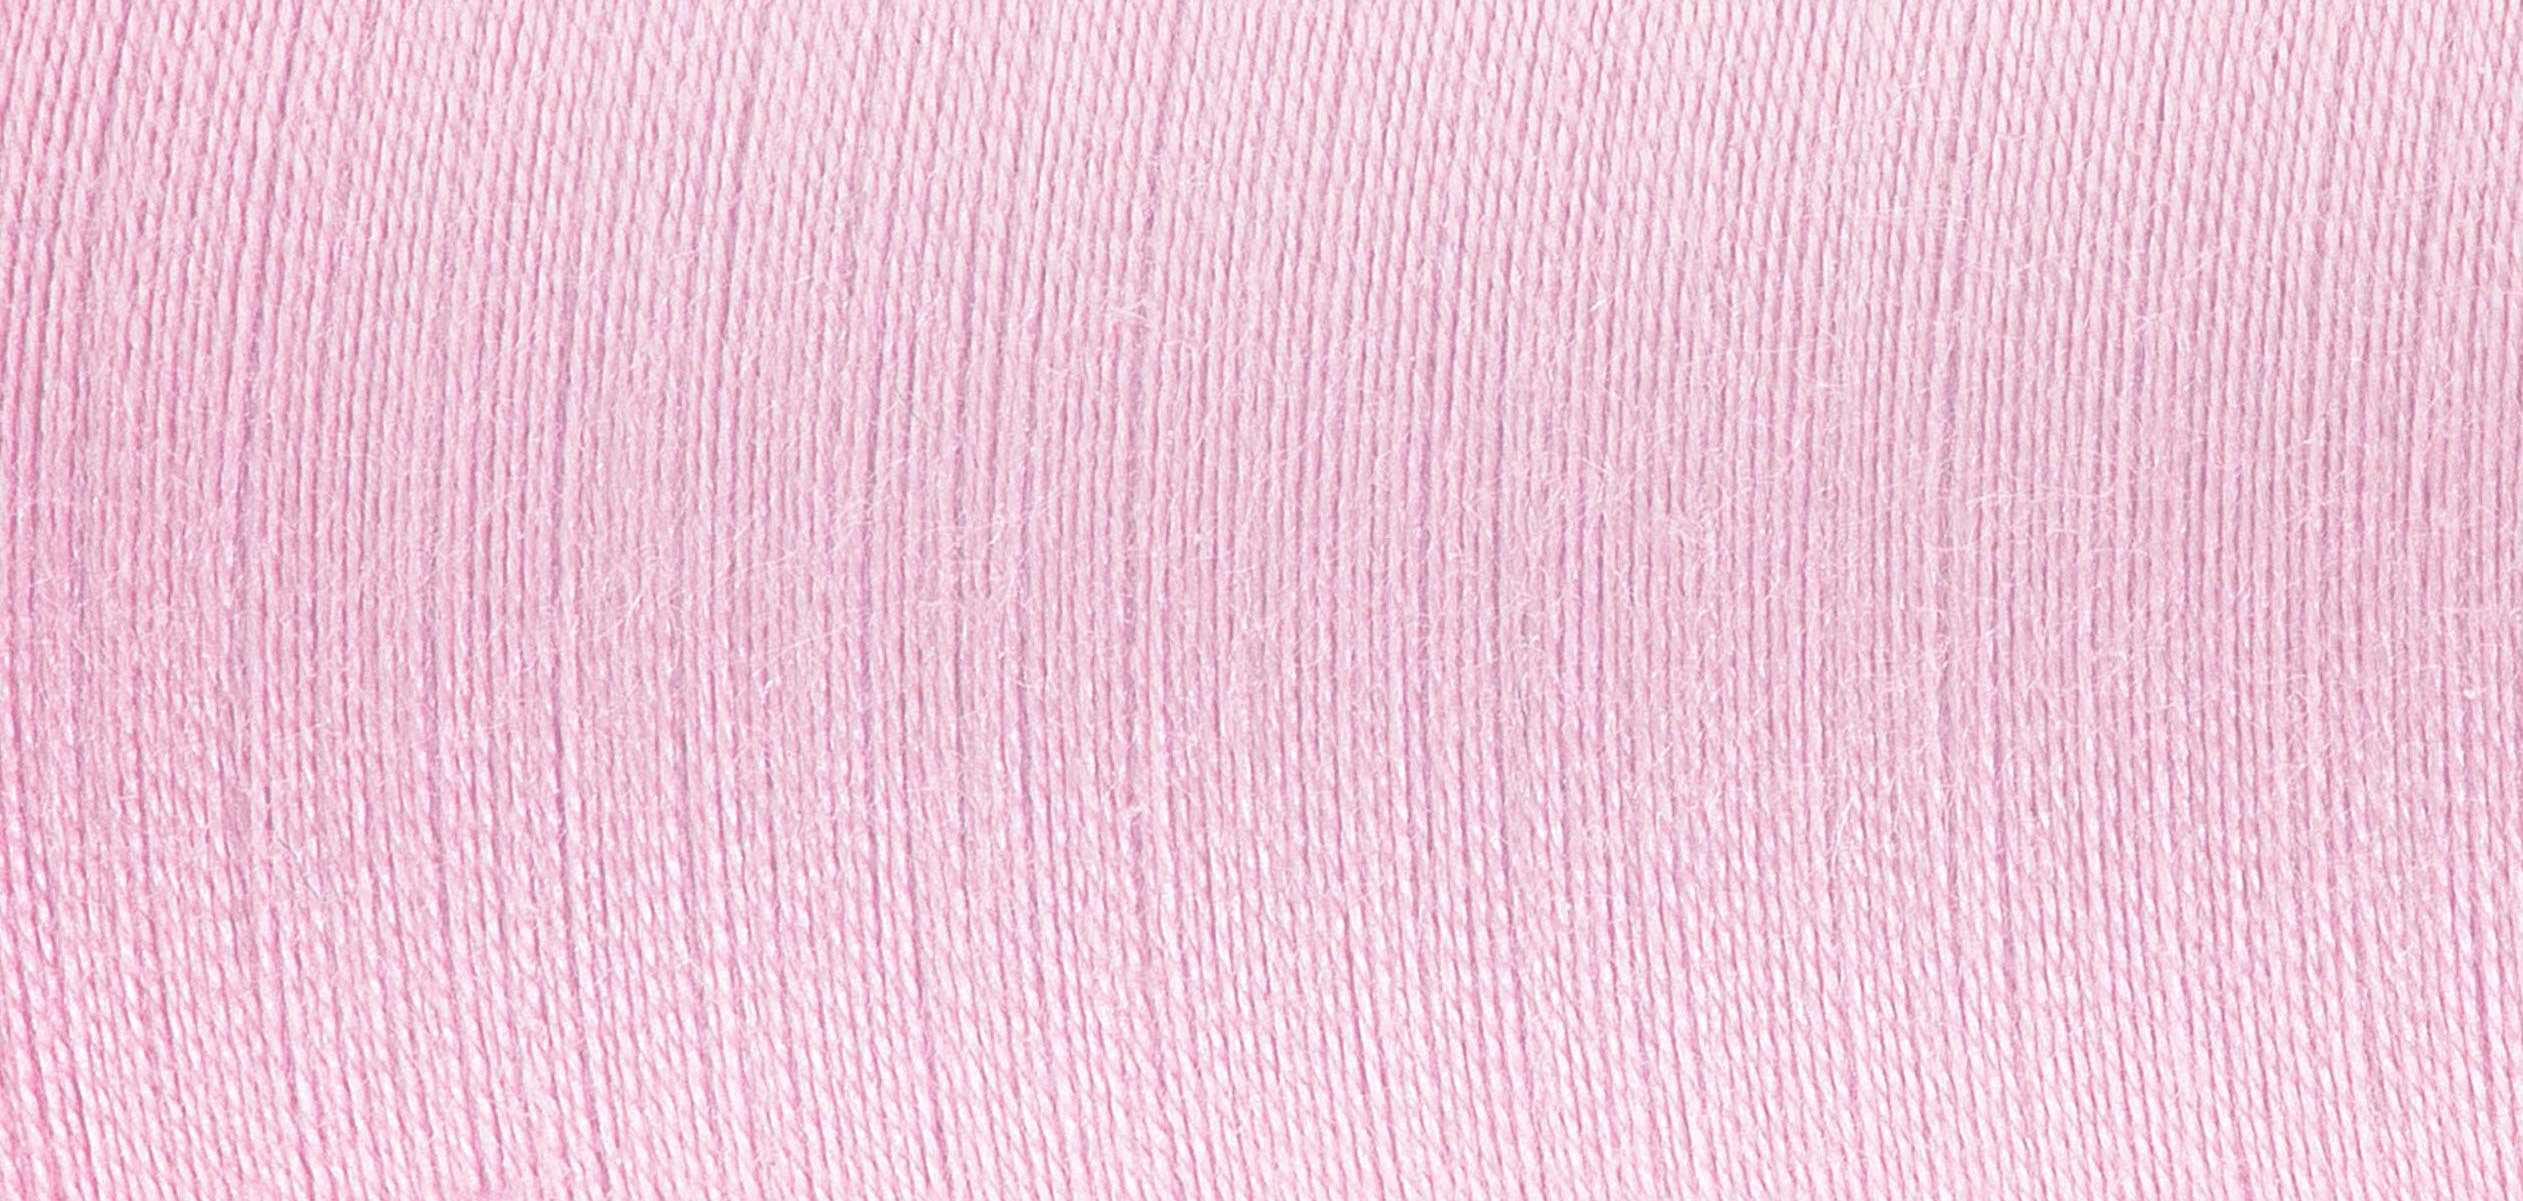 Picture of Sensa Green No. 40: 5 x 1000m: Spools: Baby Pink